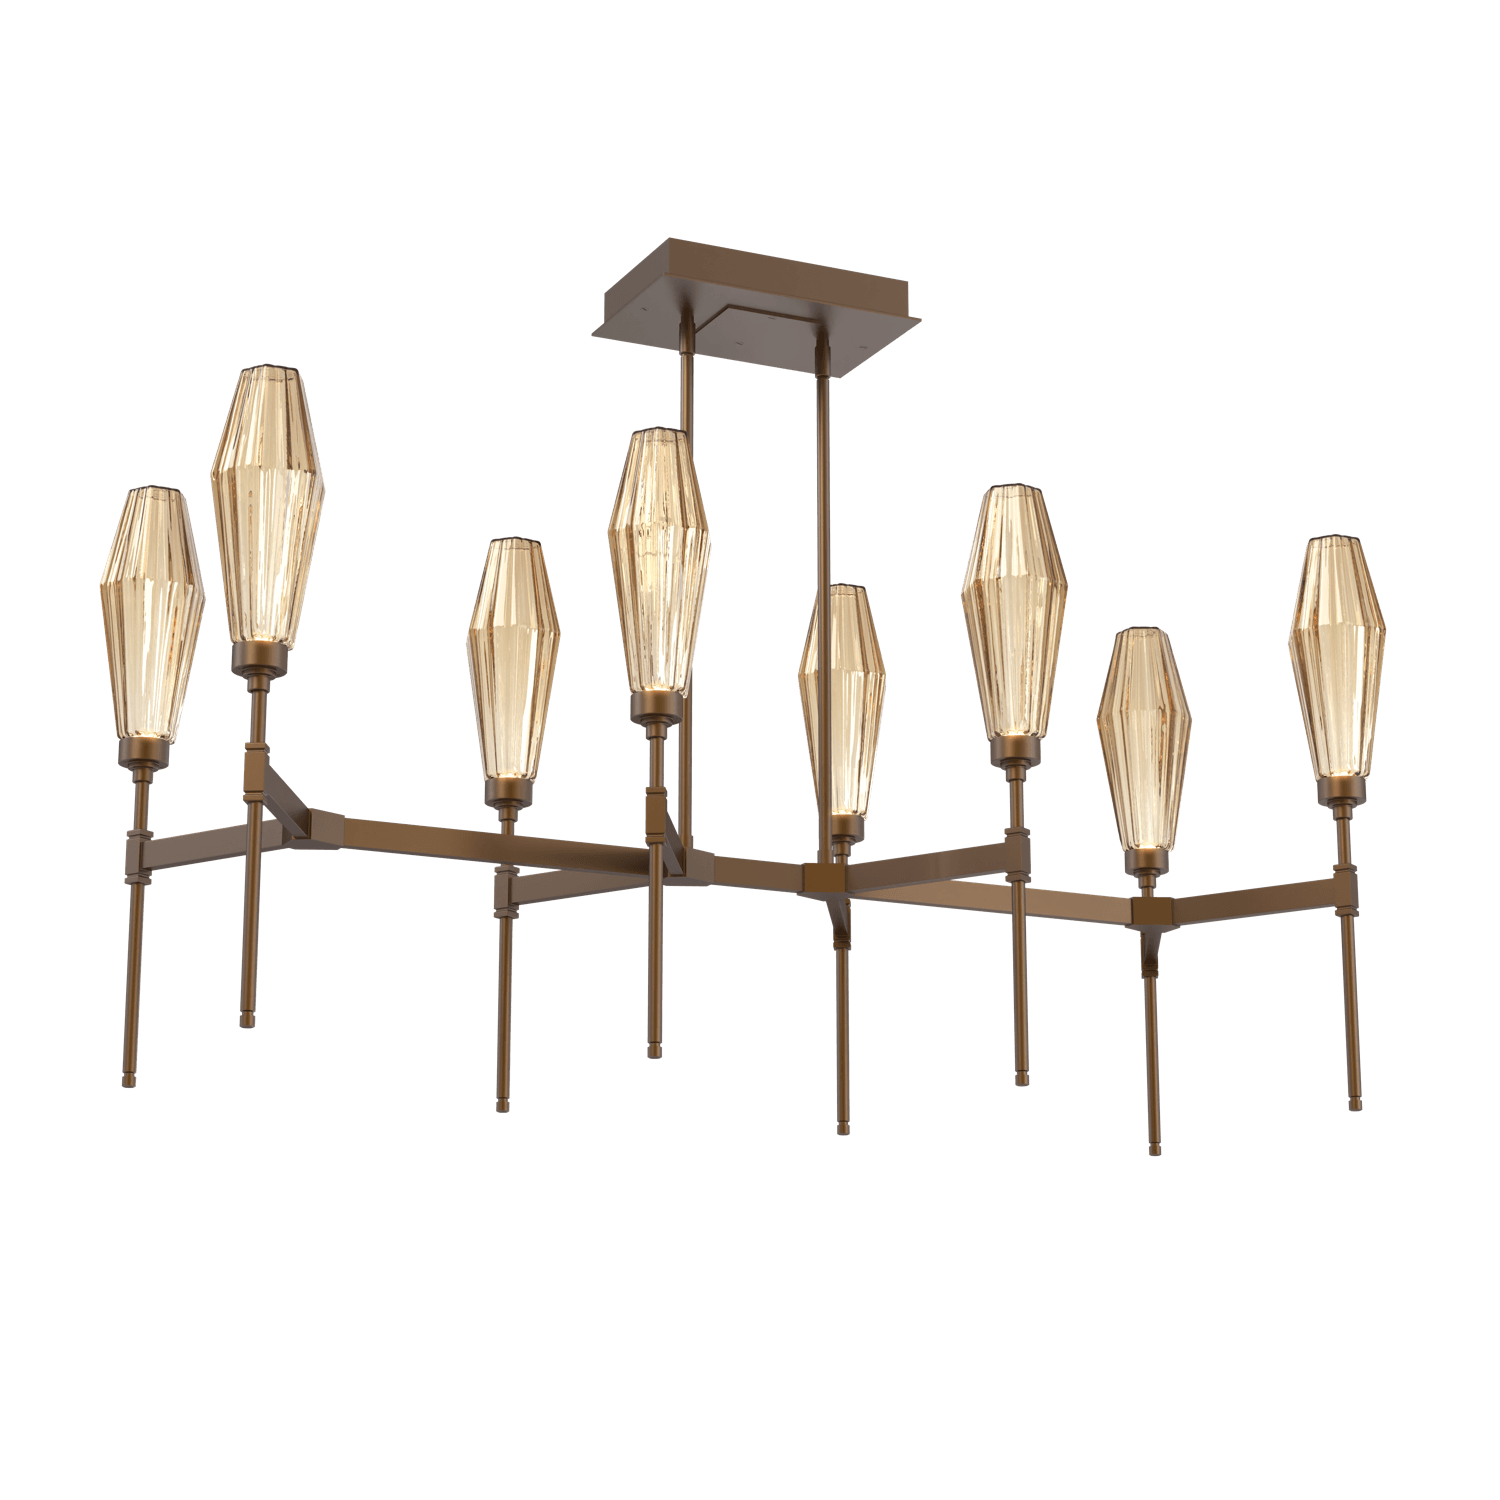 PLB0049-48-FB-RB-Hammerton-Studio-Aalto-48-inch-linear-belvedere-chandelier-with-flat-bronze-finish-and-optic-ribbed-bronze-glass-shades-and-LED-lamping